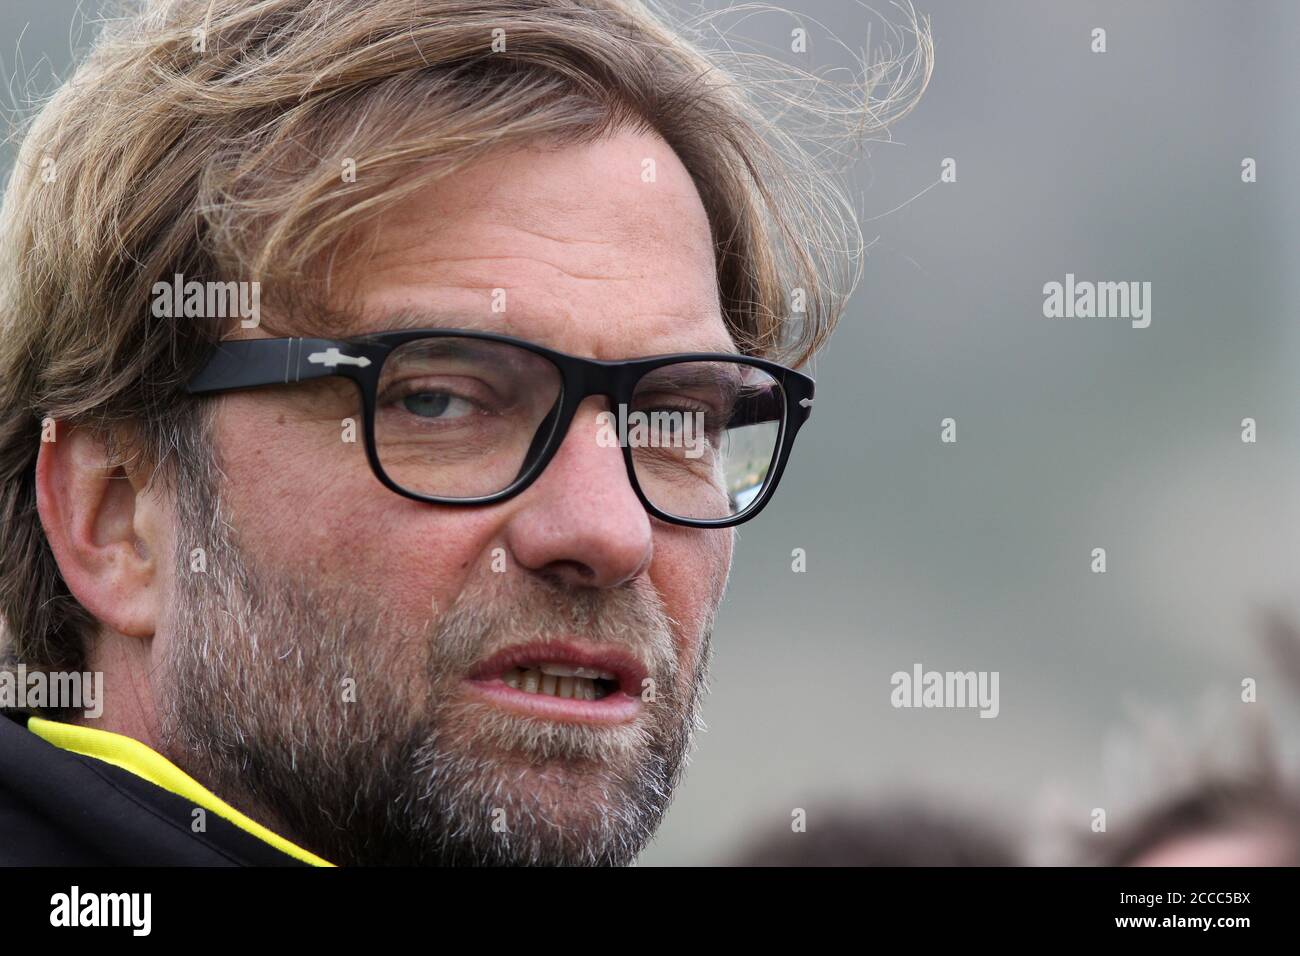 Jurgen Klopp Glasses High Resolution Stock Photography and Images - Alamy